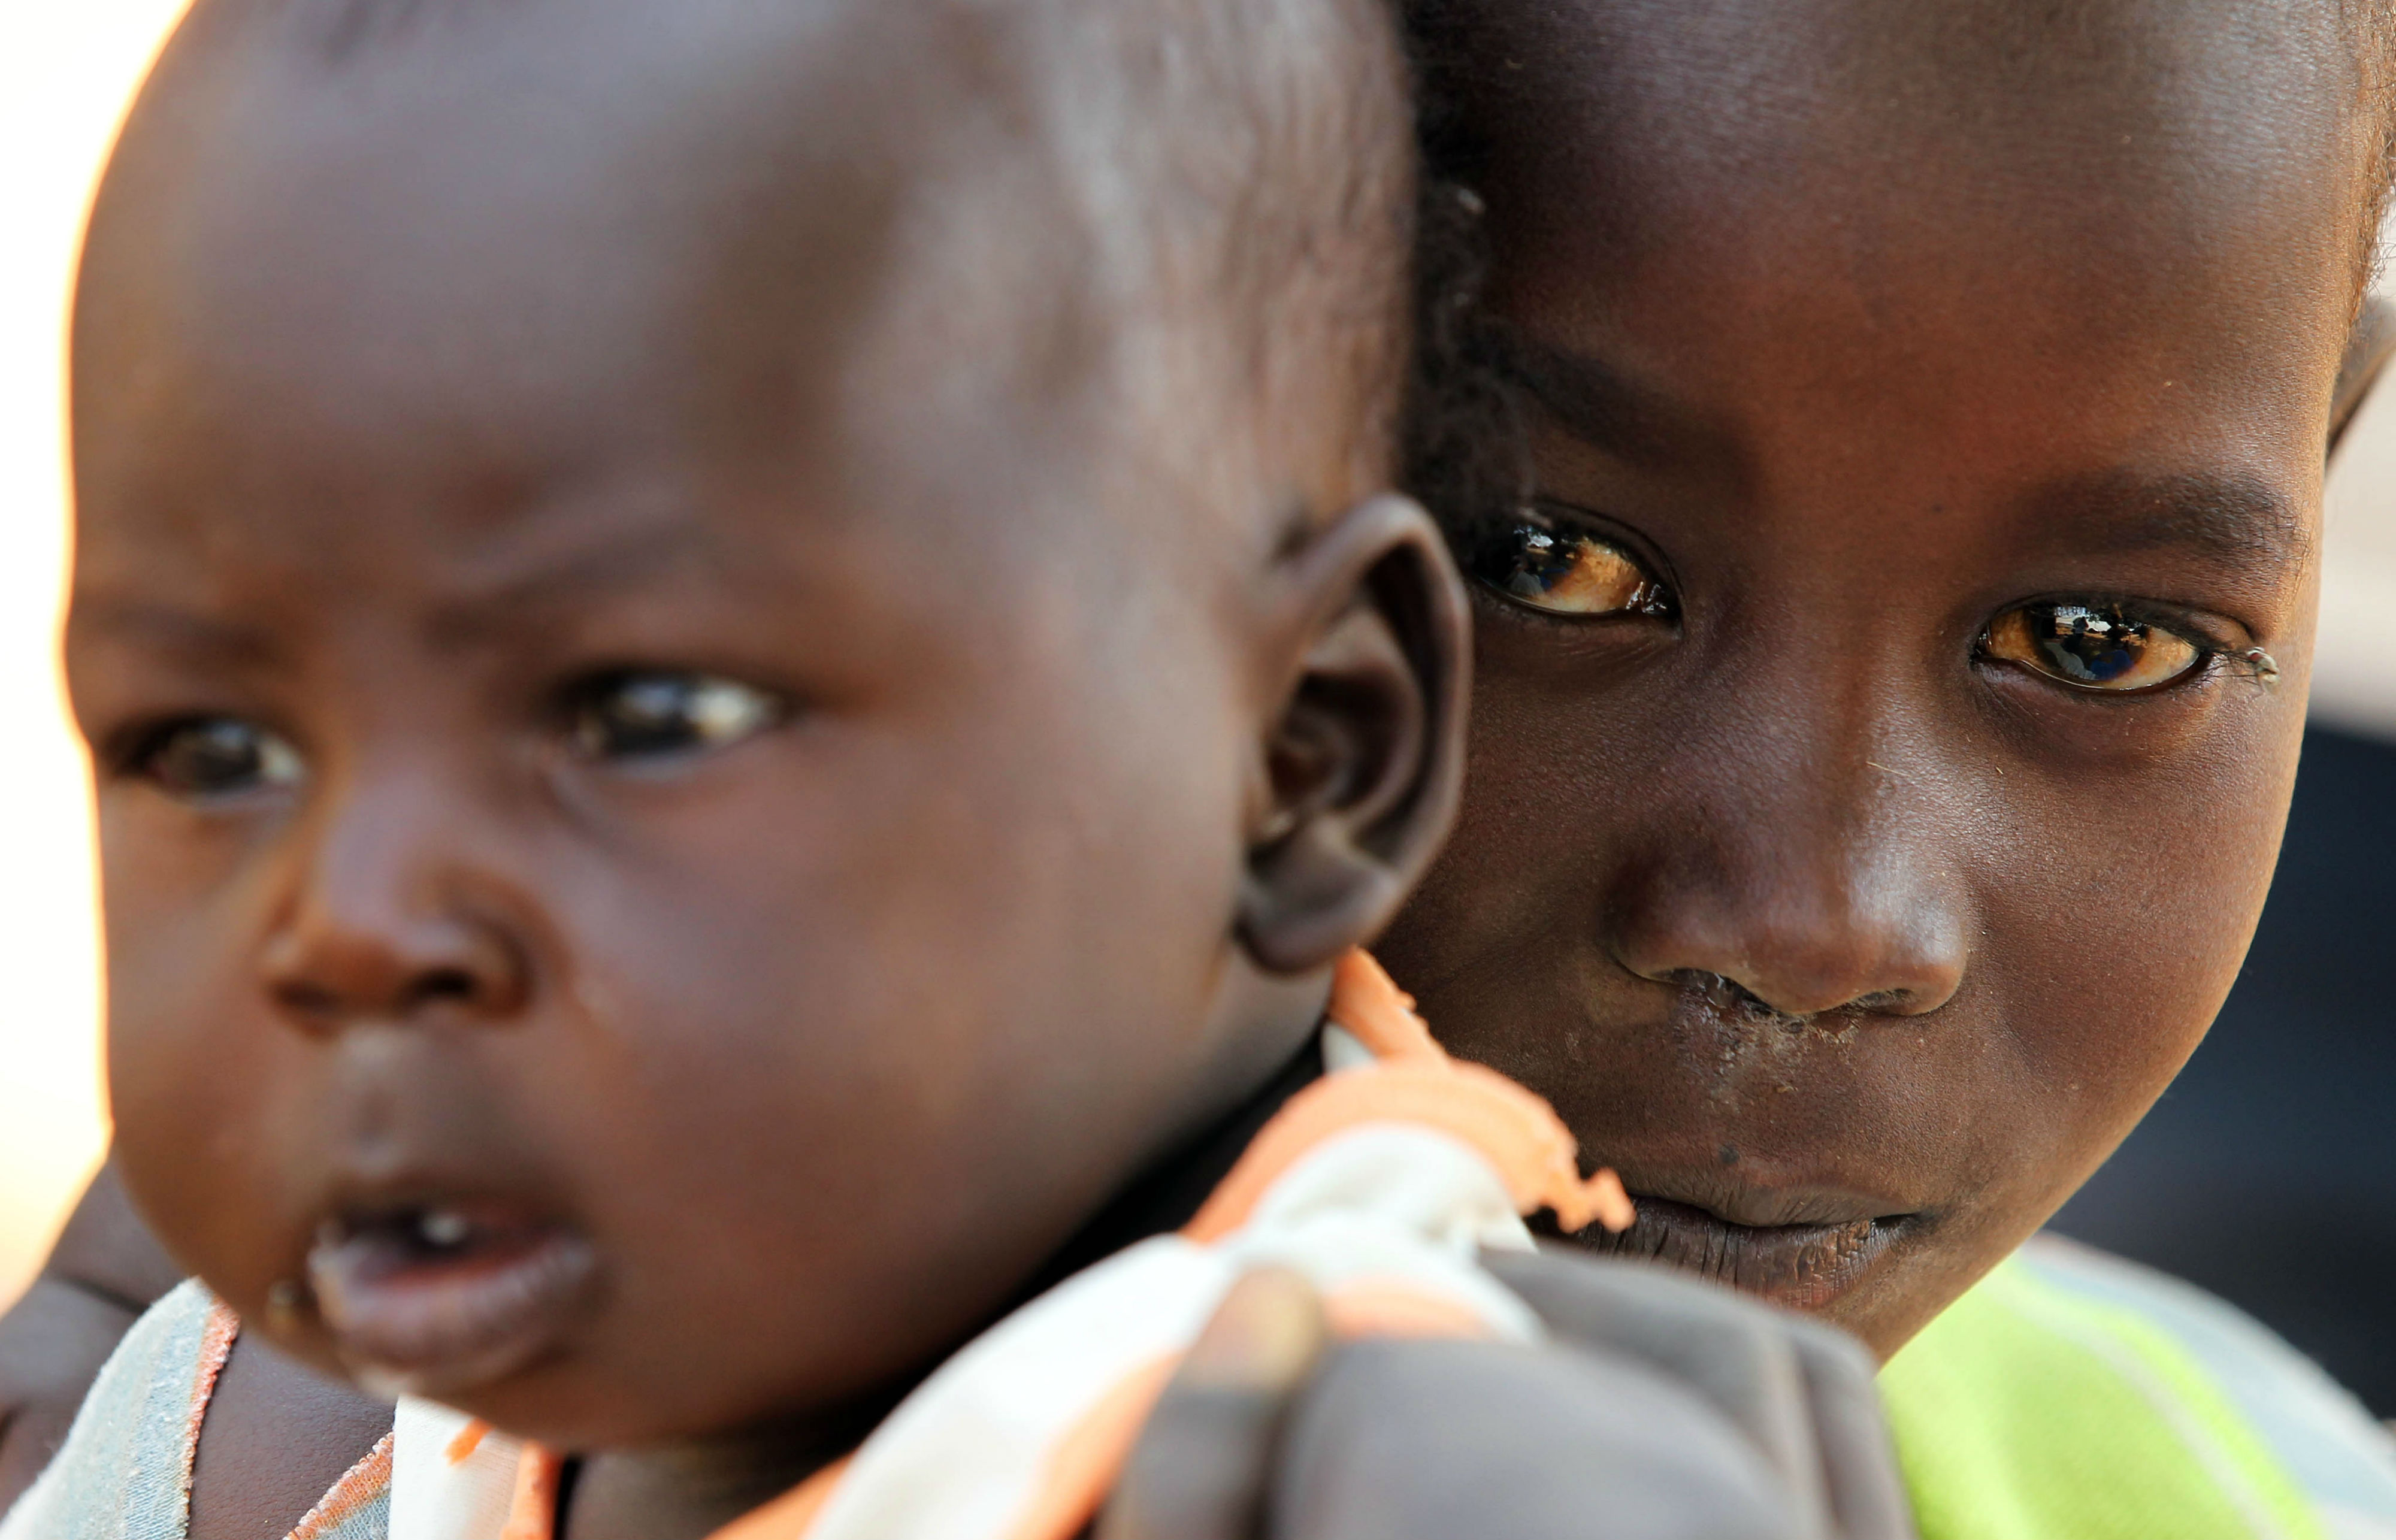 War robs South Sudan youths of childhood, says bishops' conference head 